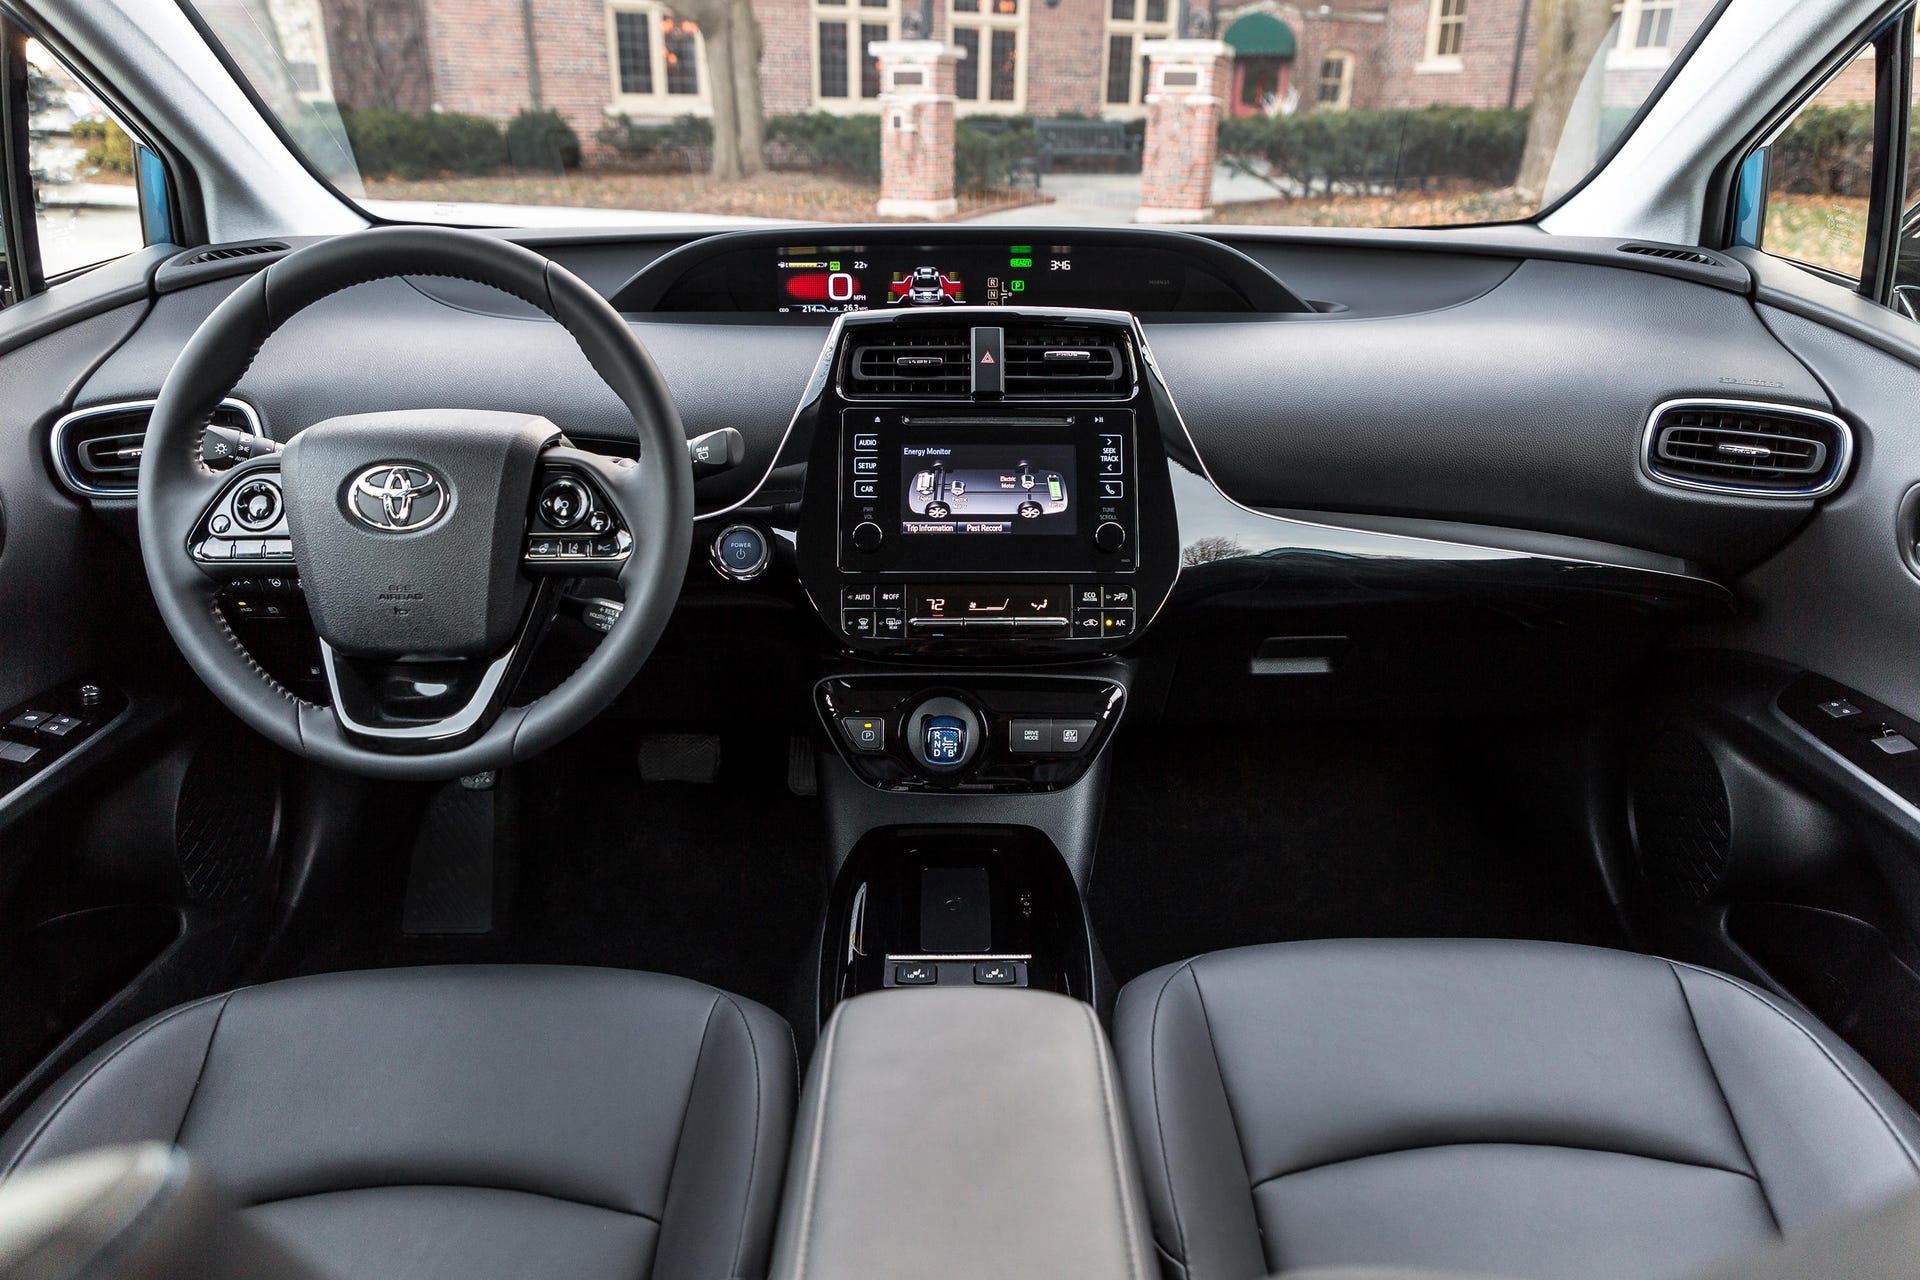 2020 Toyota Prius Model Overview Pricing Tech And Specs Cnet